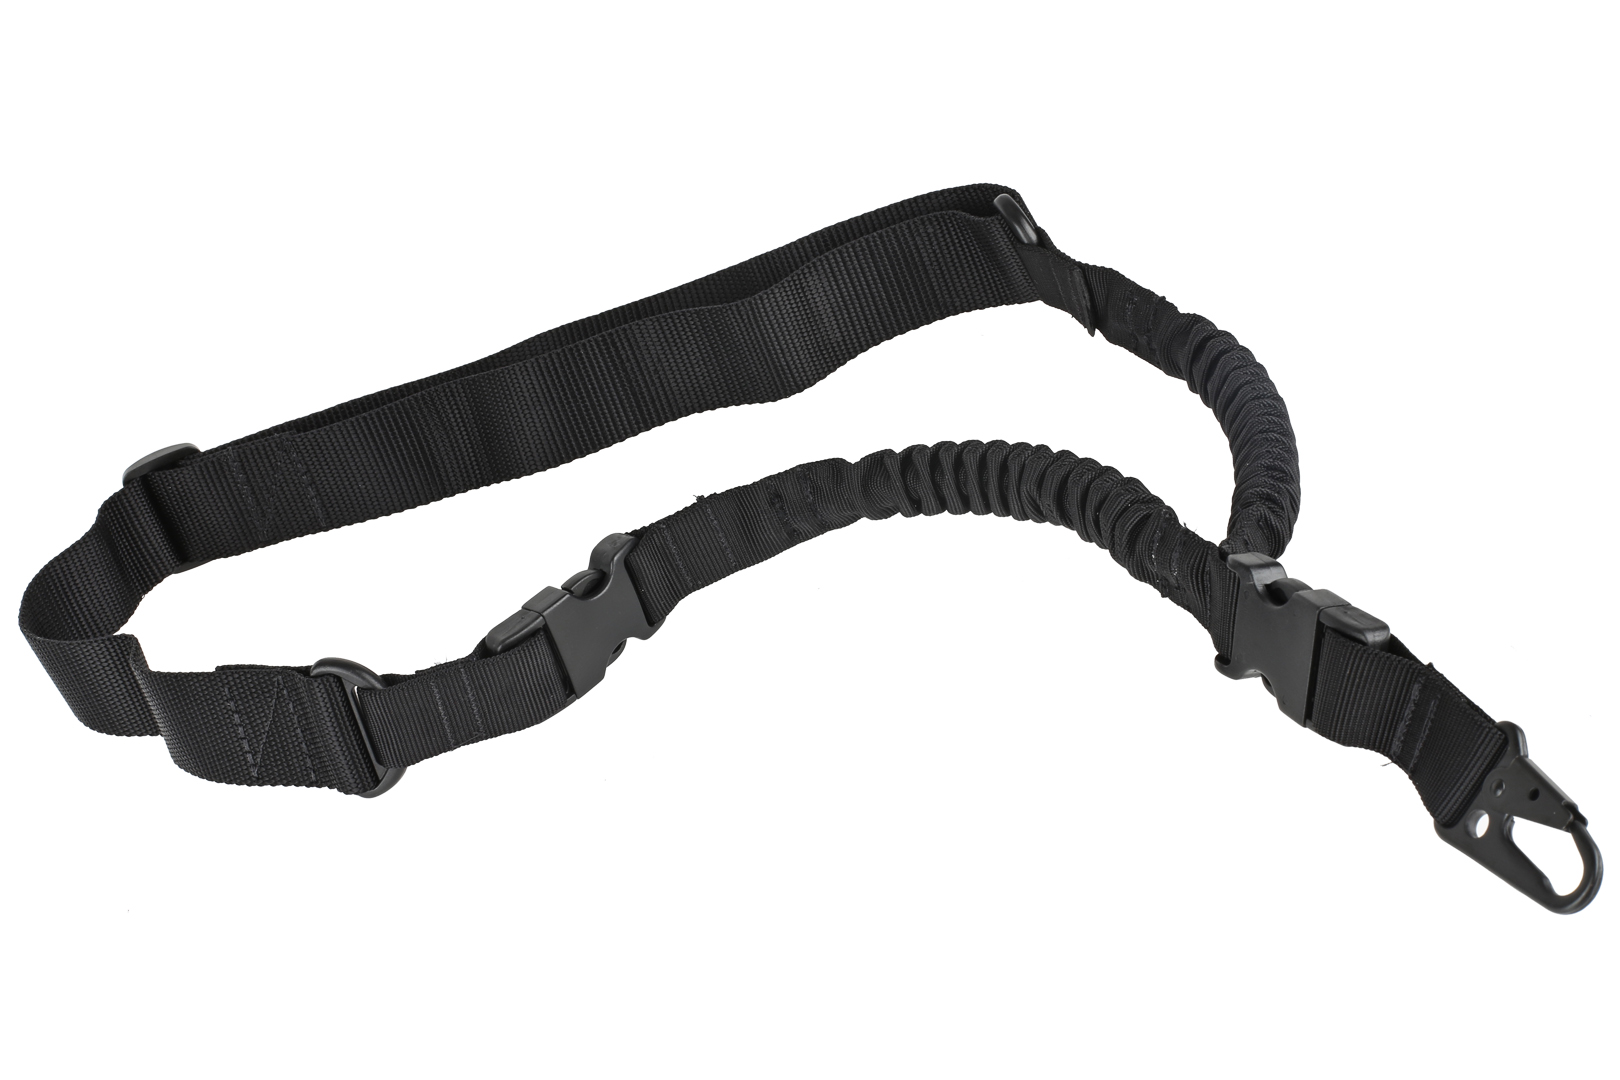 Mission First Tactical Gen2 One Point Sling XL - $25.99